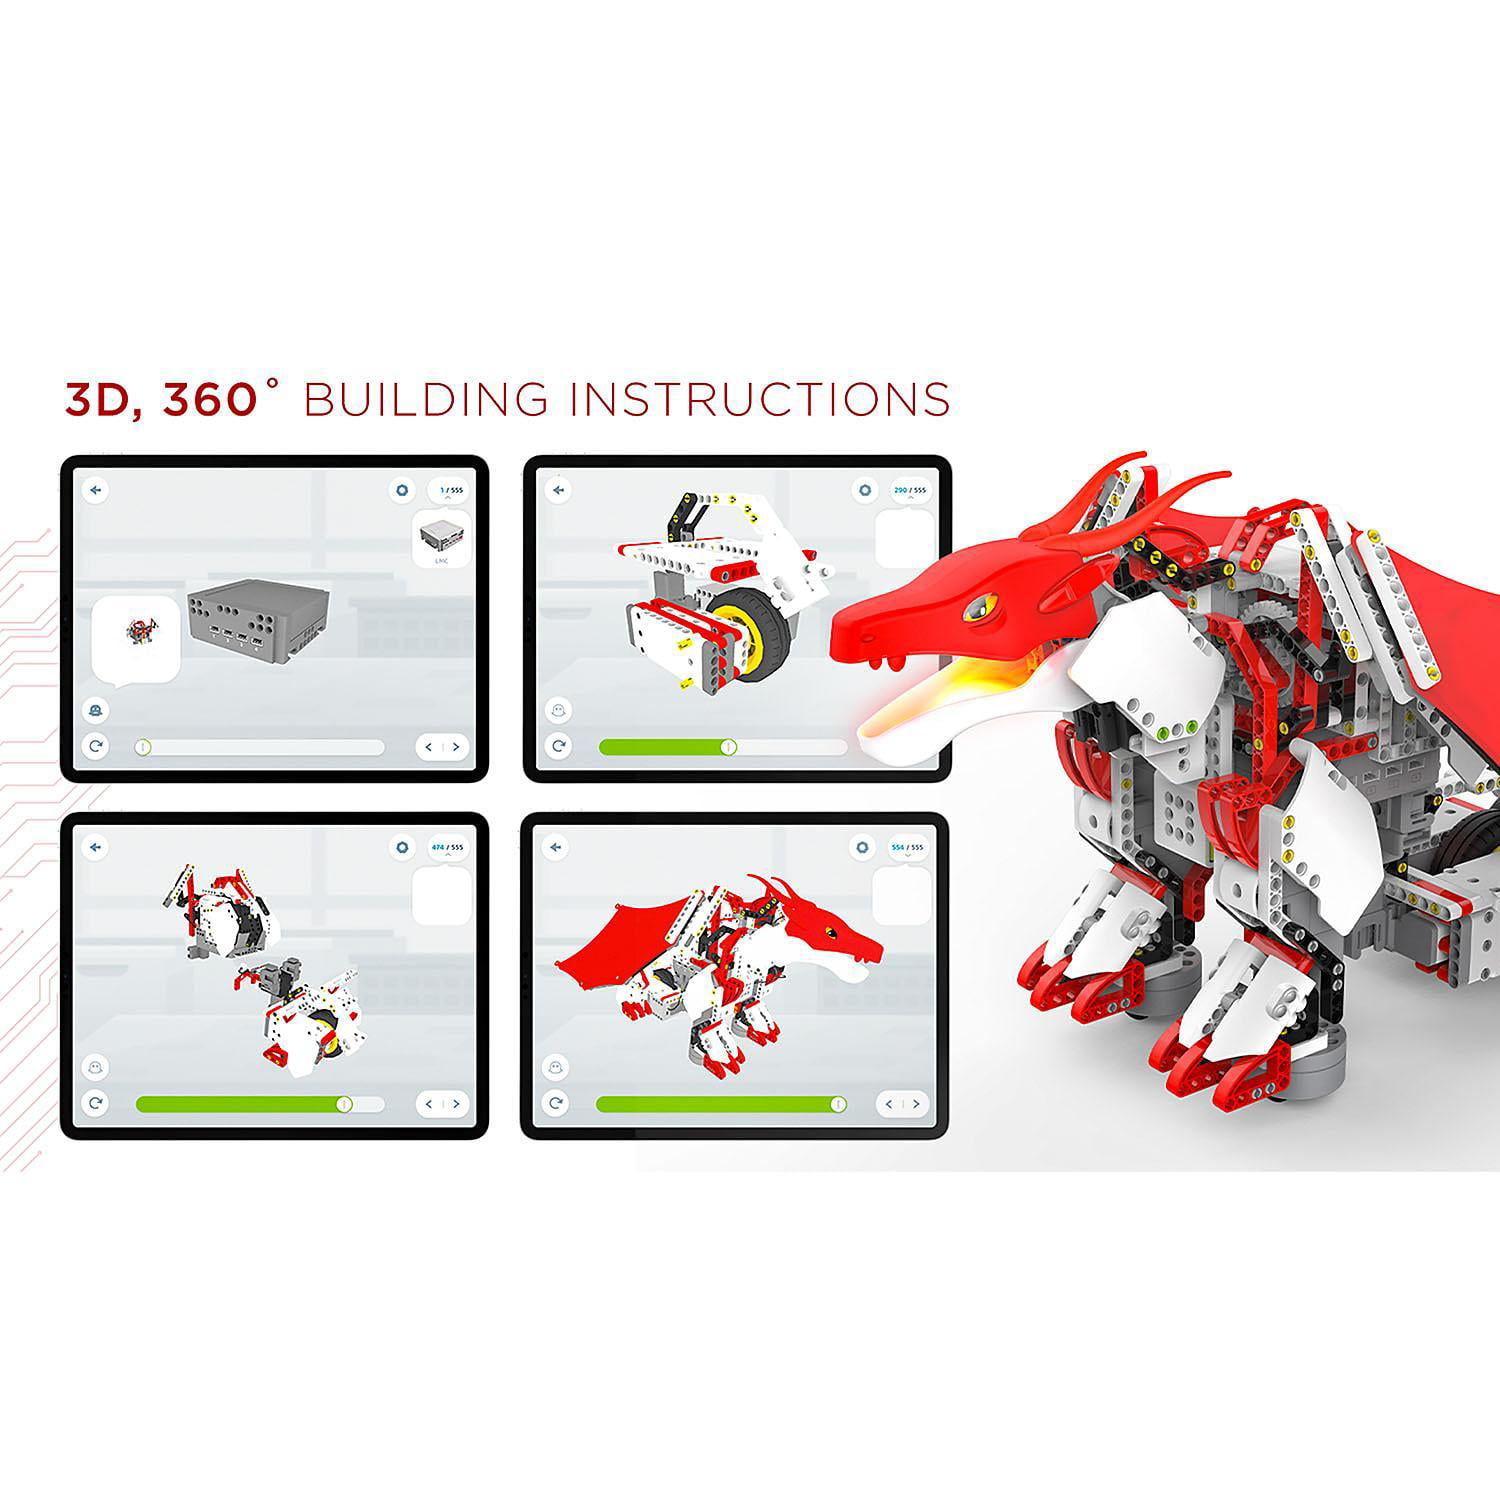 UBTECH JIMU Robot Mythical Series Red Building Kit JRA0601 for sale online 